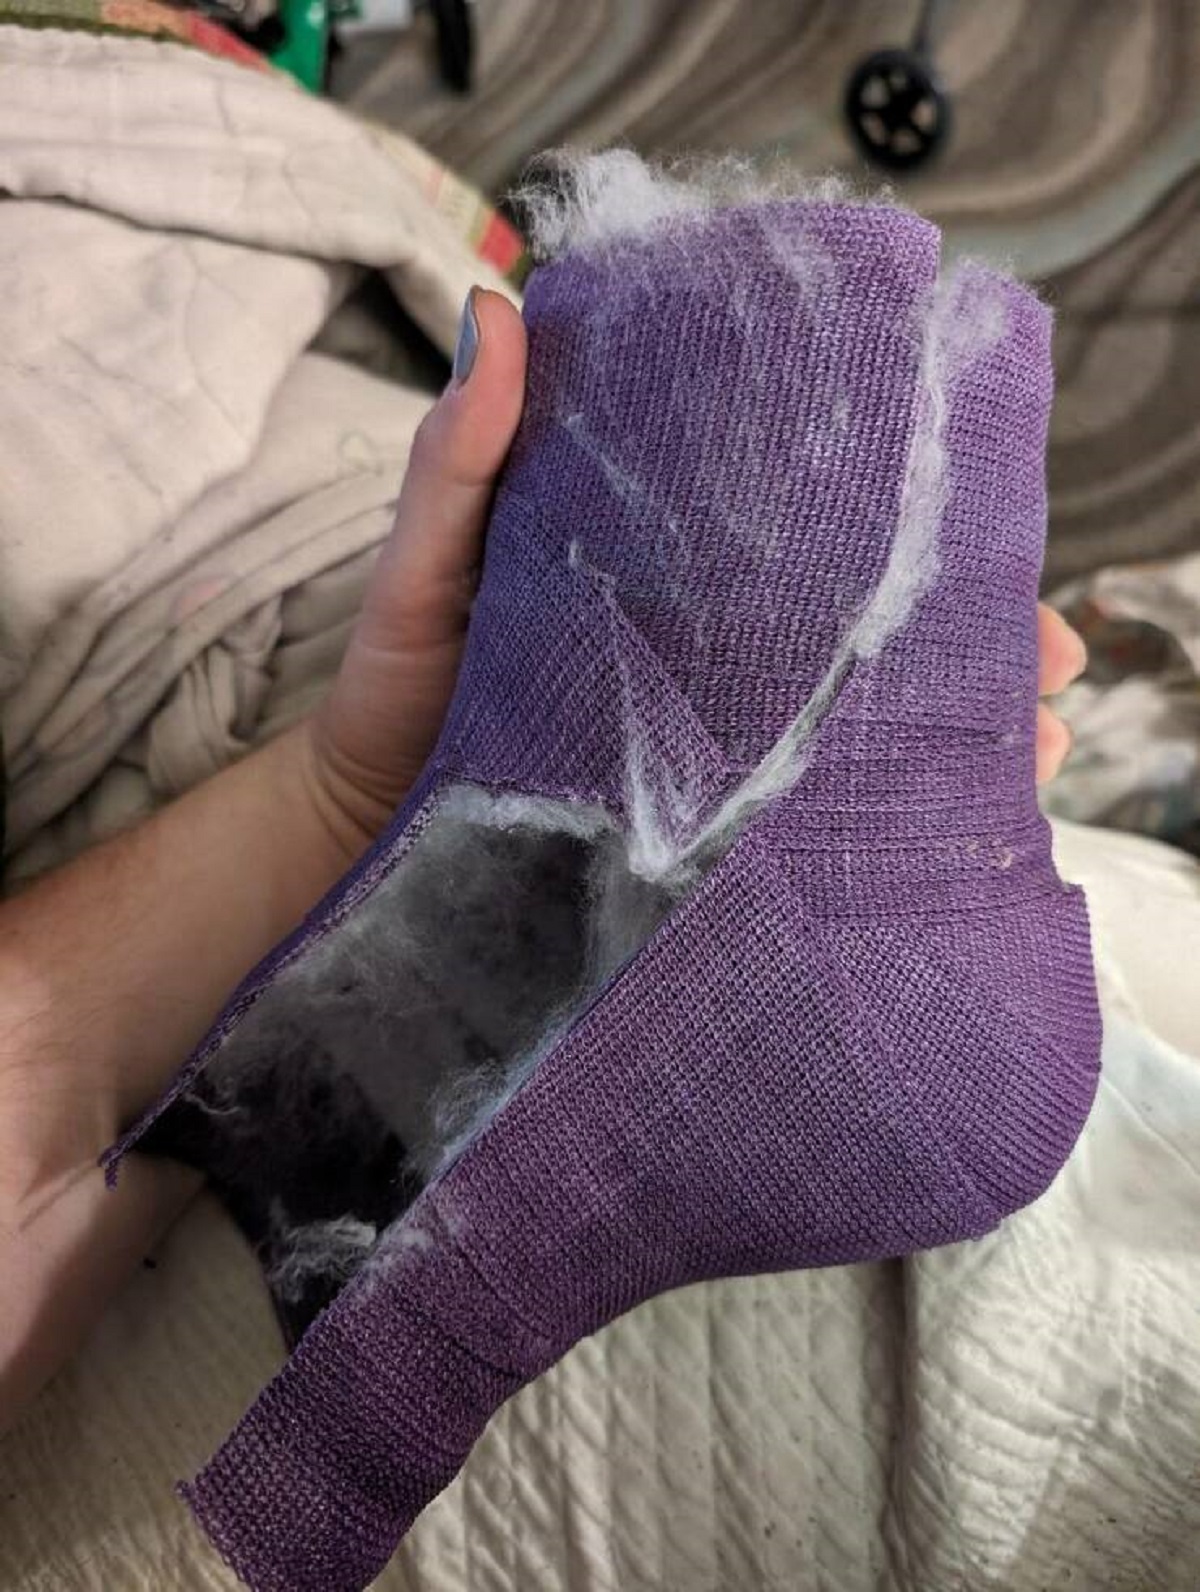 "The angle of my foot in my cast (45 instead of 90)"